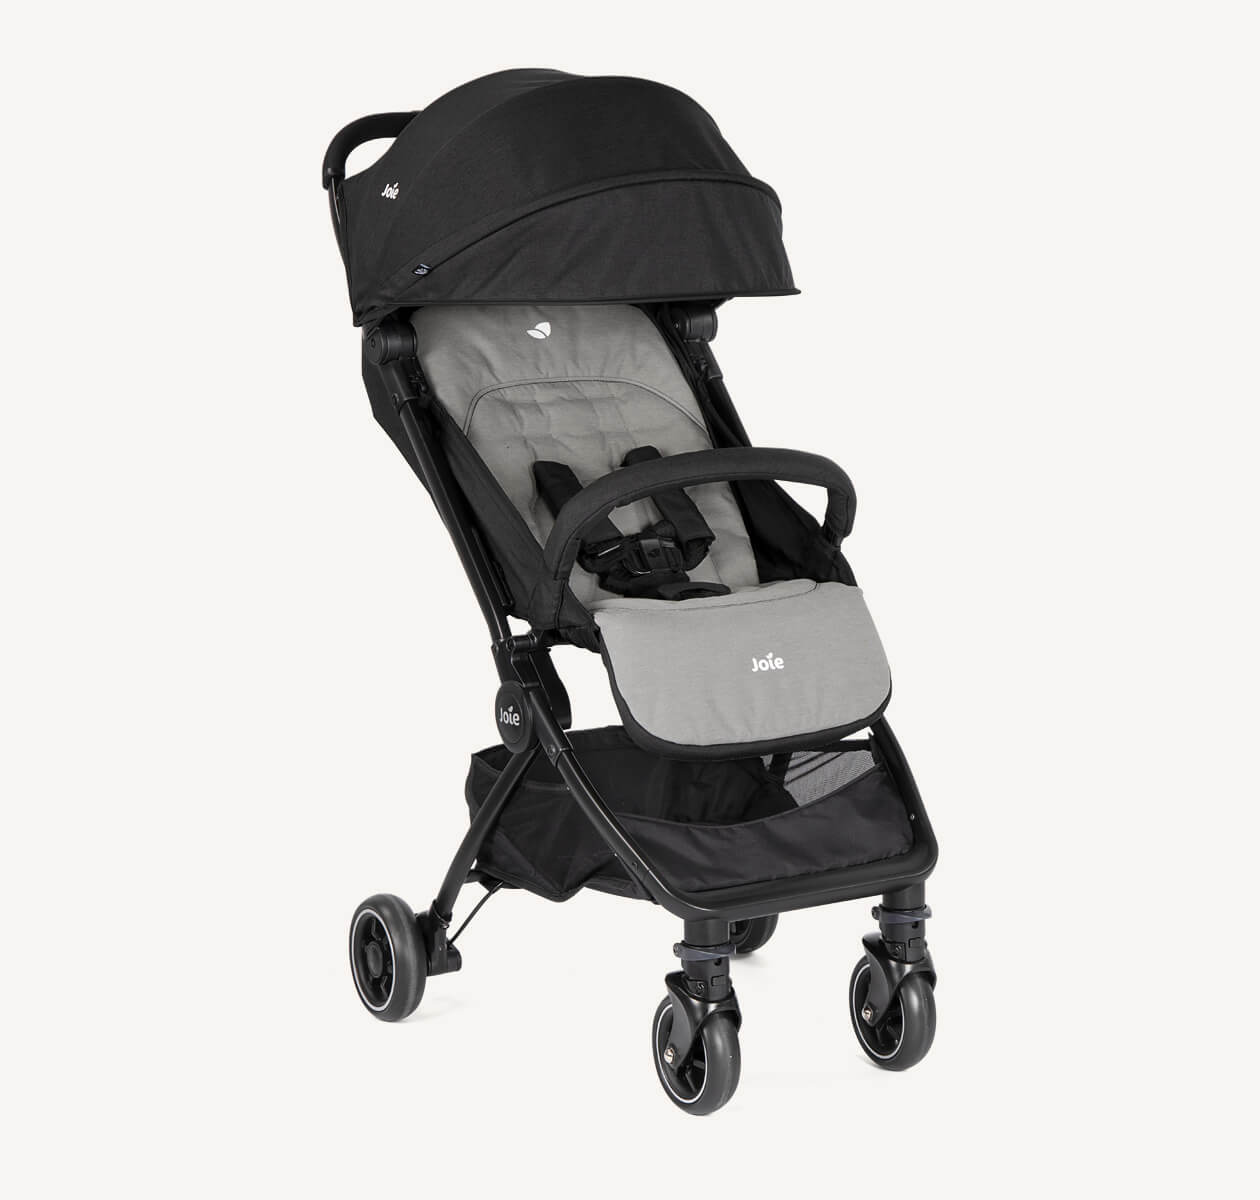  Joie pact pushchair in the colour ember black and gray on a right angle